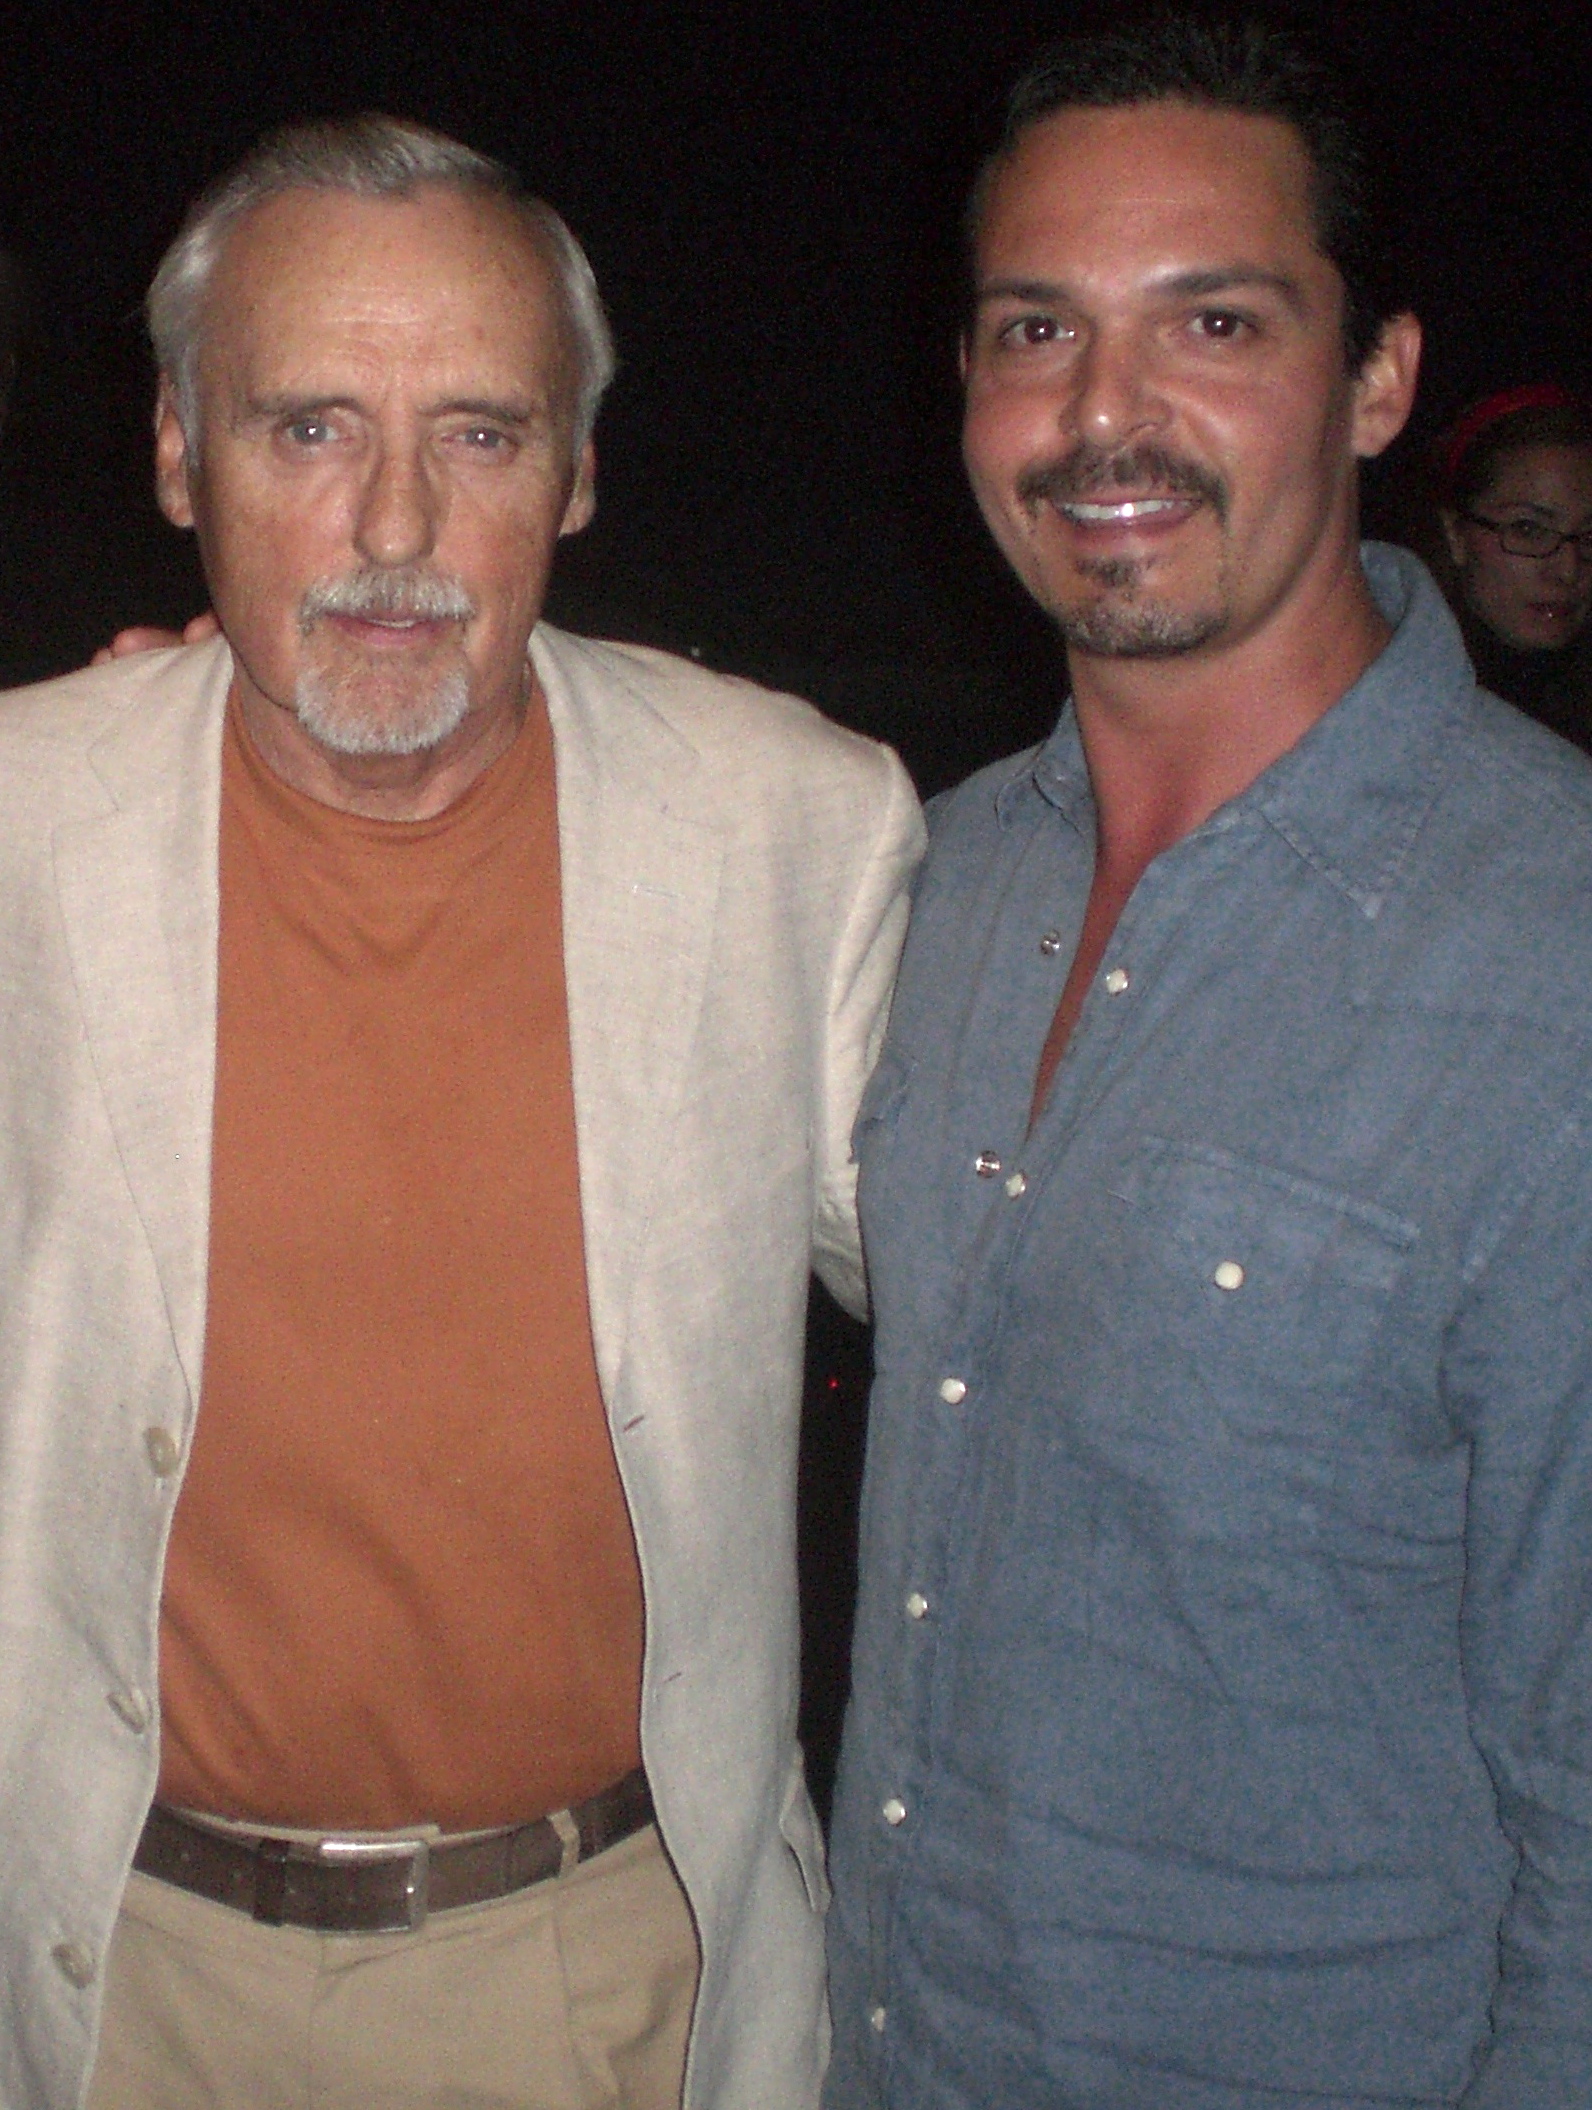 Dennis Hopper and Billy Gallo at CineVegas Premiere of Have Love will travel